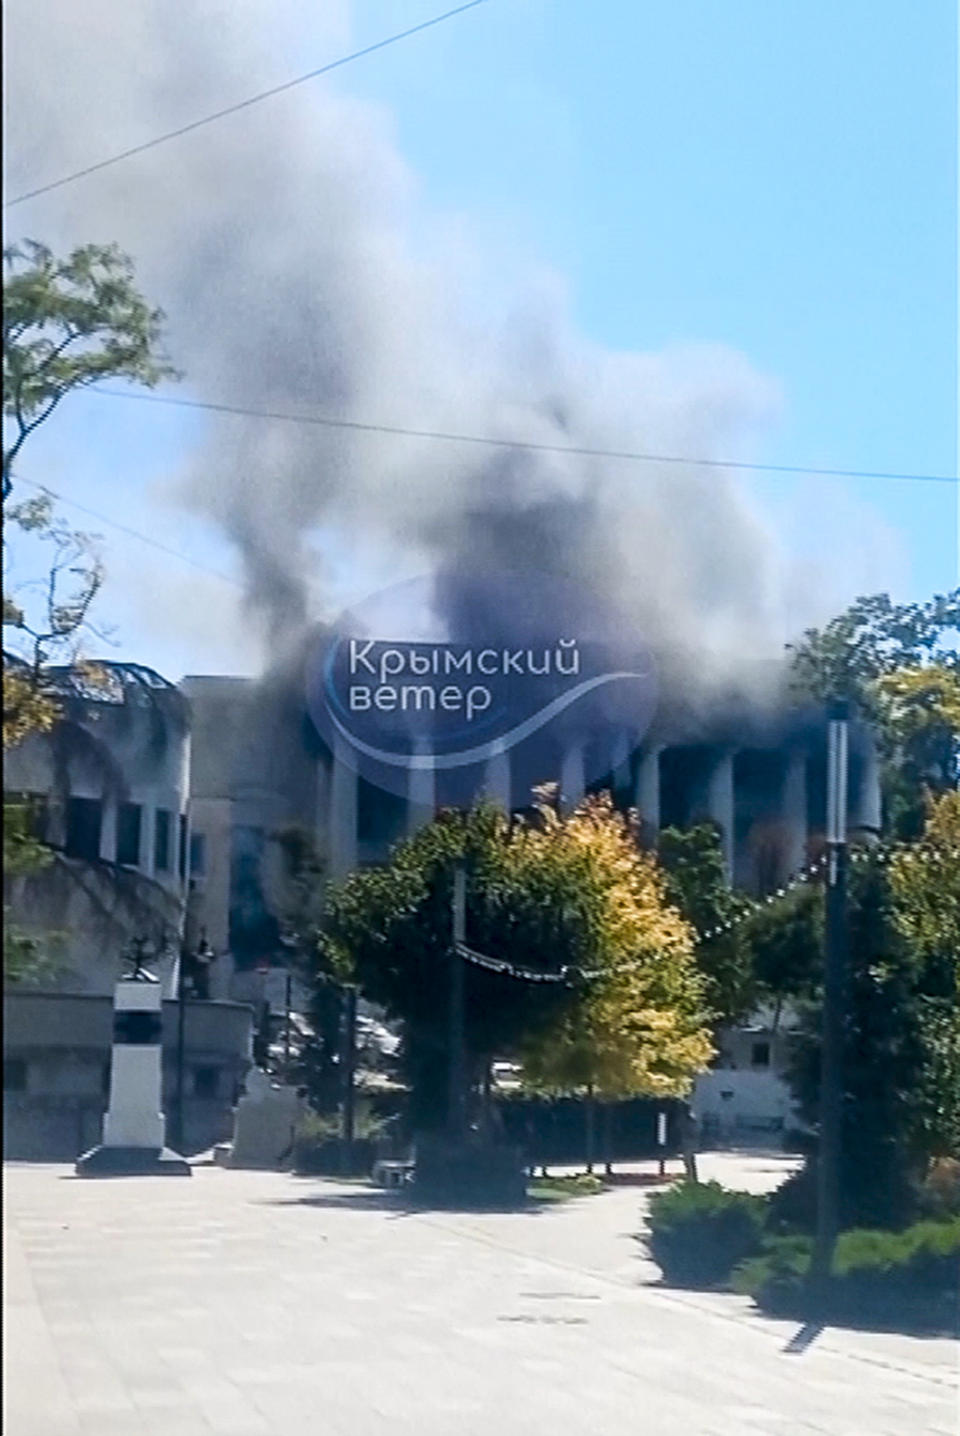 FILE - In this photo taken taken from video on Friday, Sept. 22, 2023, smoke rises over the Headquarters of Russia's Black Sea Fleet in Sevastopol, Crimea. Successful Ukrainian drone and missile strikes have provided a major morale boost for Kyiv at a time when its undermanned and under-gunned forces are facing Russian attacks along the more than 1,000-kilometer front line. Challenging Russia’s naval superiority also has helped create more favorable conditions for Ukrainian grain exports and other shipments from the country’s Black Sea ports. (AP Photo/File)